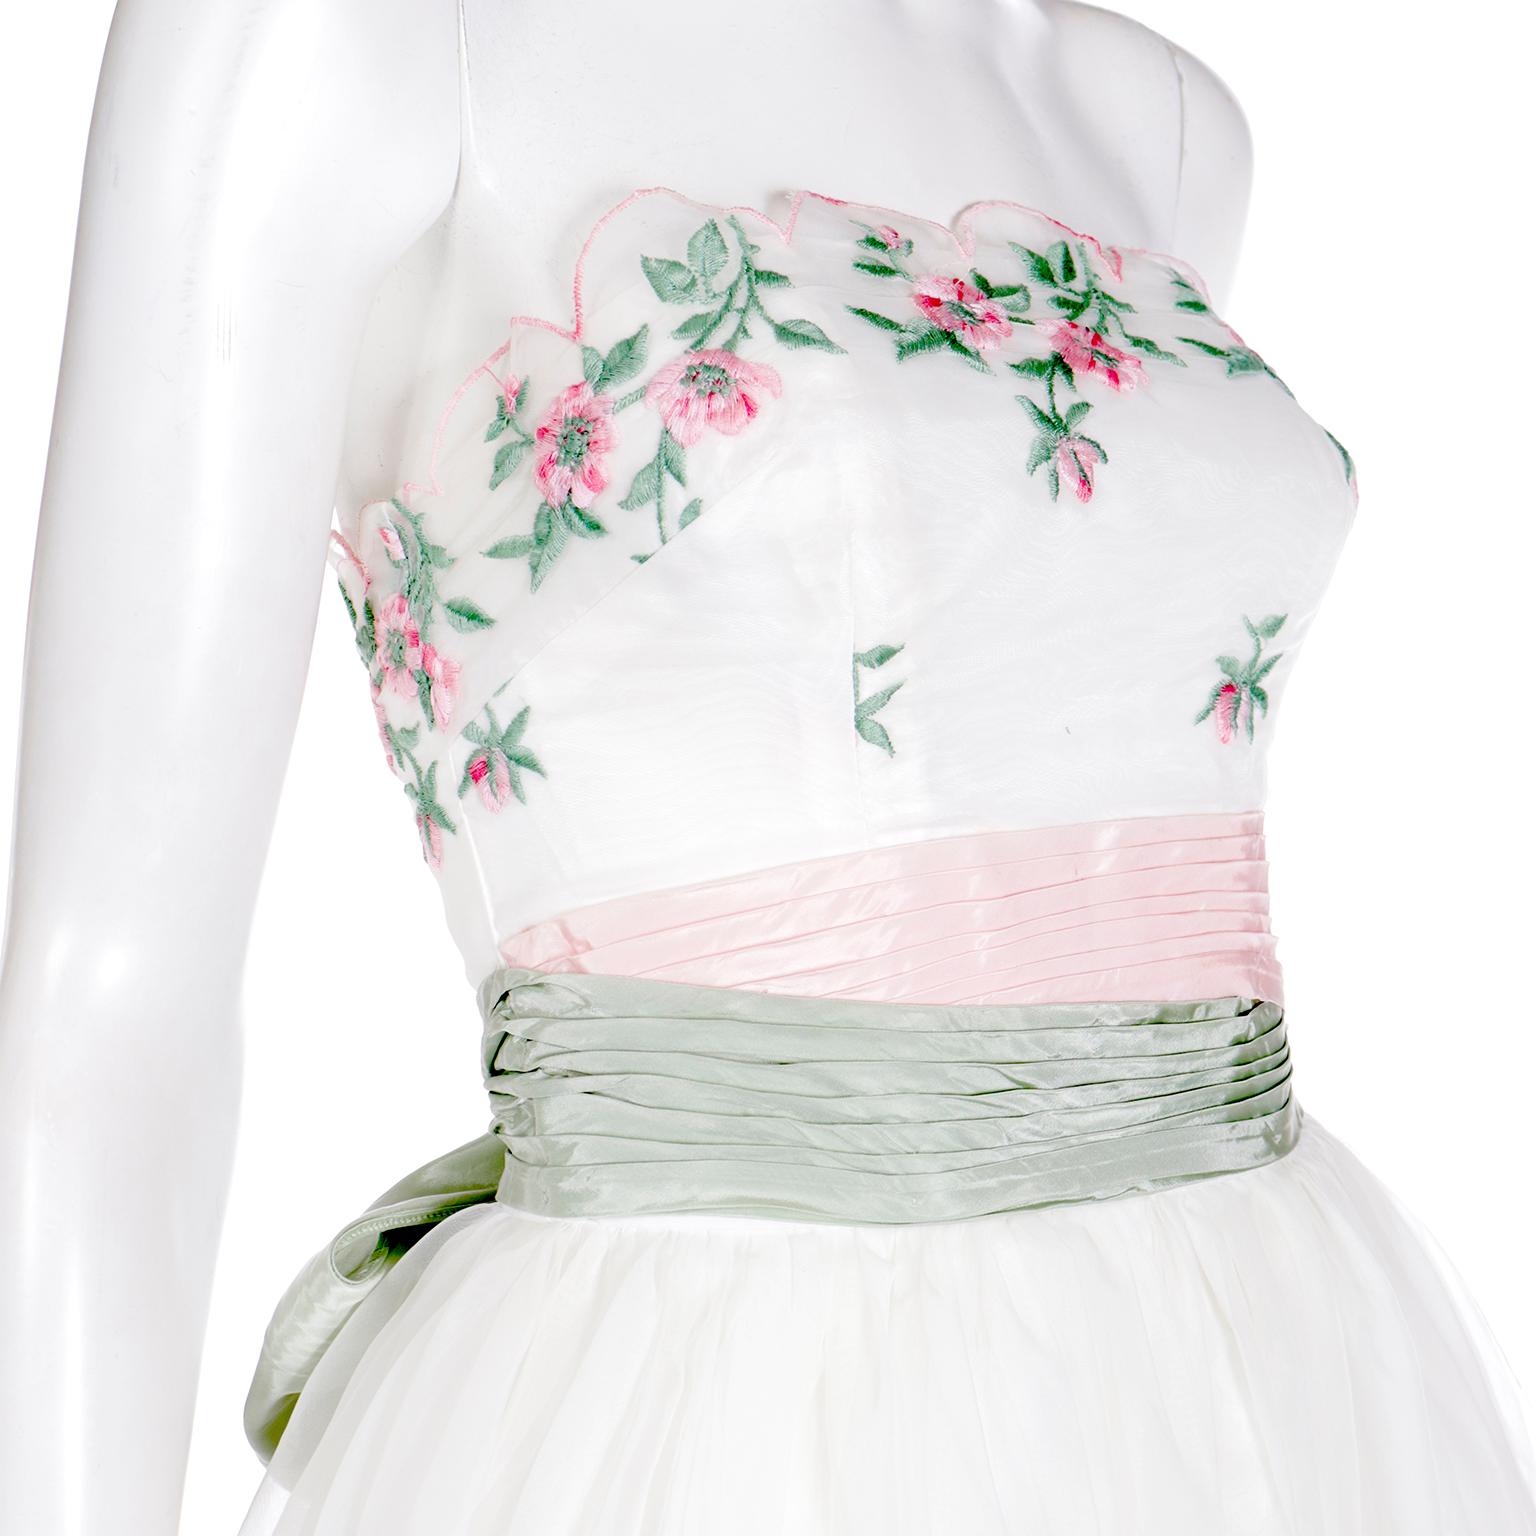 Emma Domb 1950's White Party Dress w Pink and Green Embroidered Flowers For Sale 4